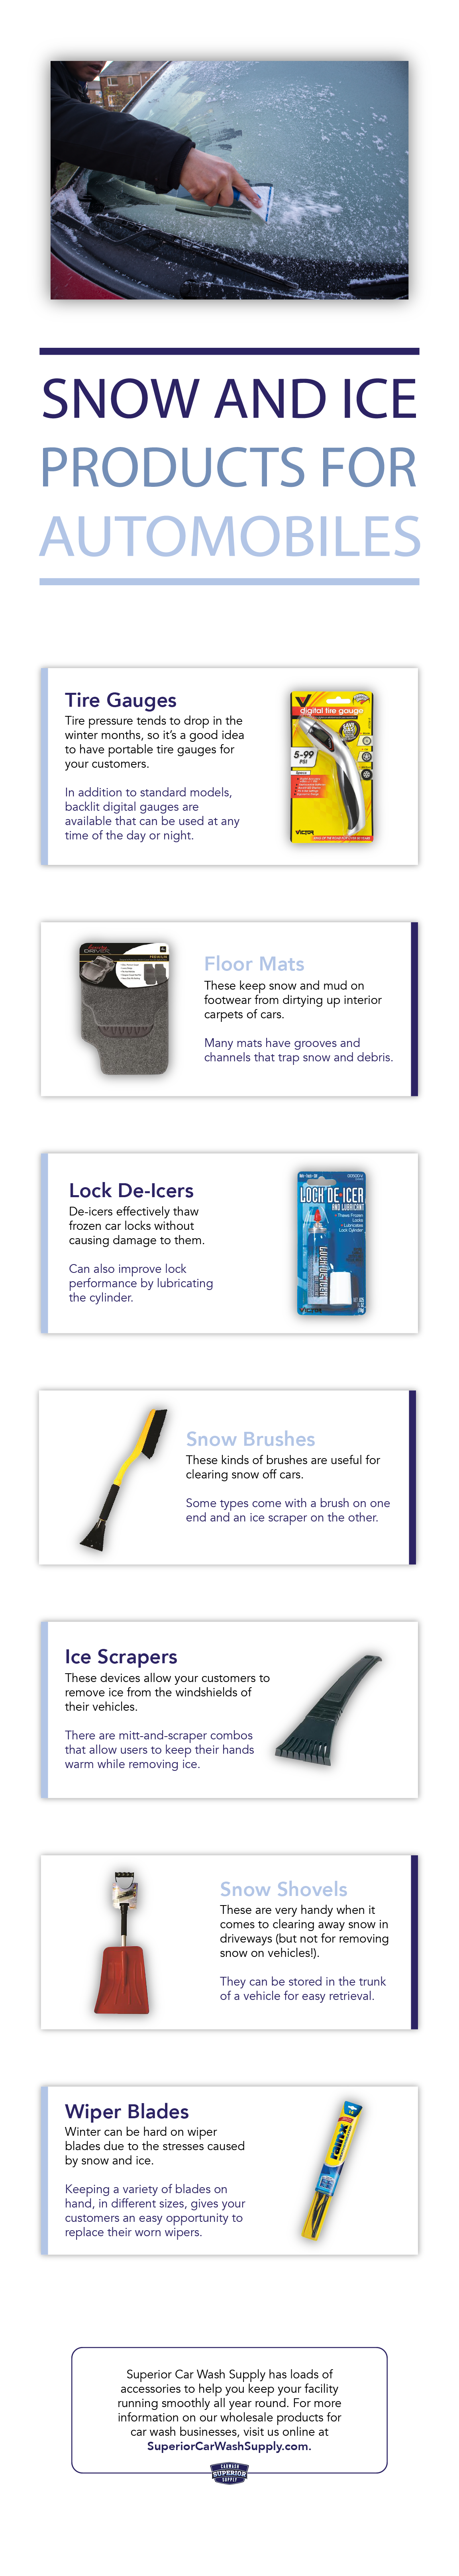 Snow and Ice Products for Automobiles Infographic